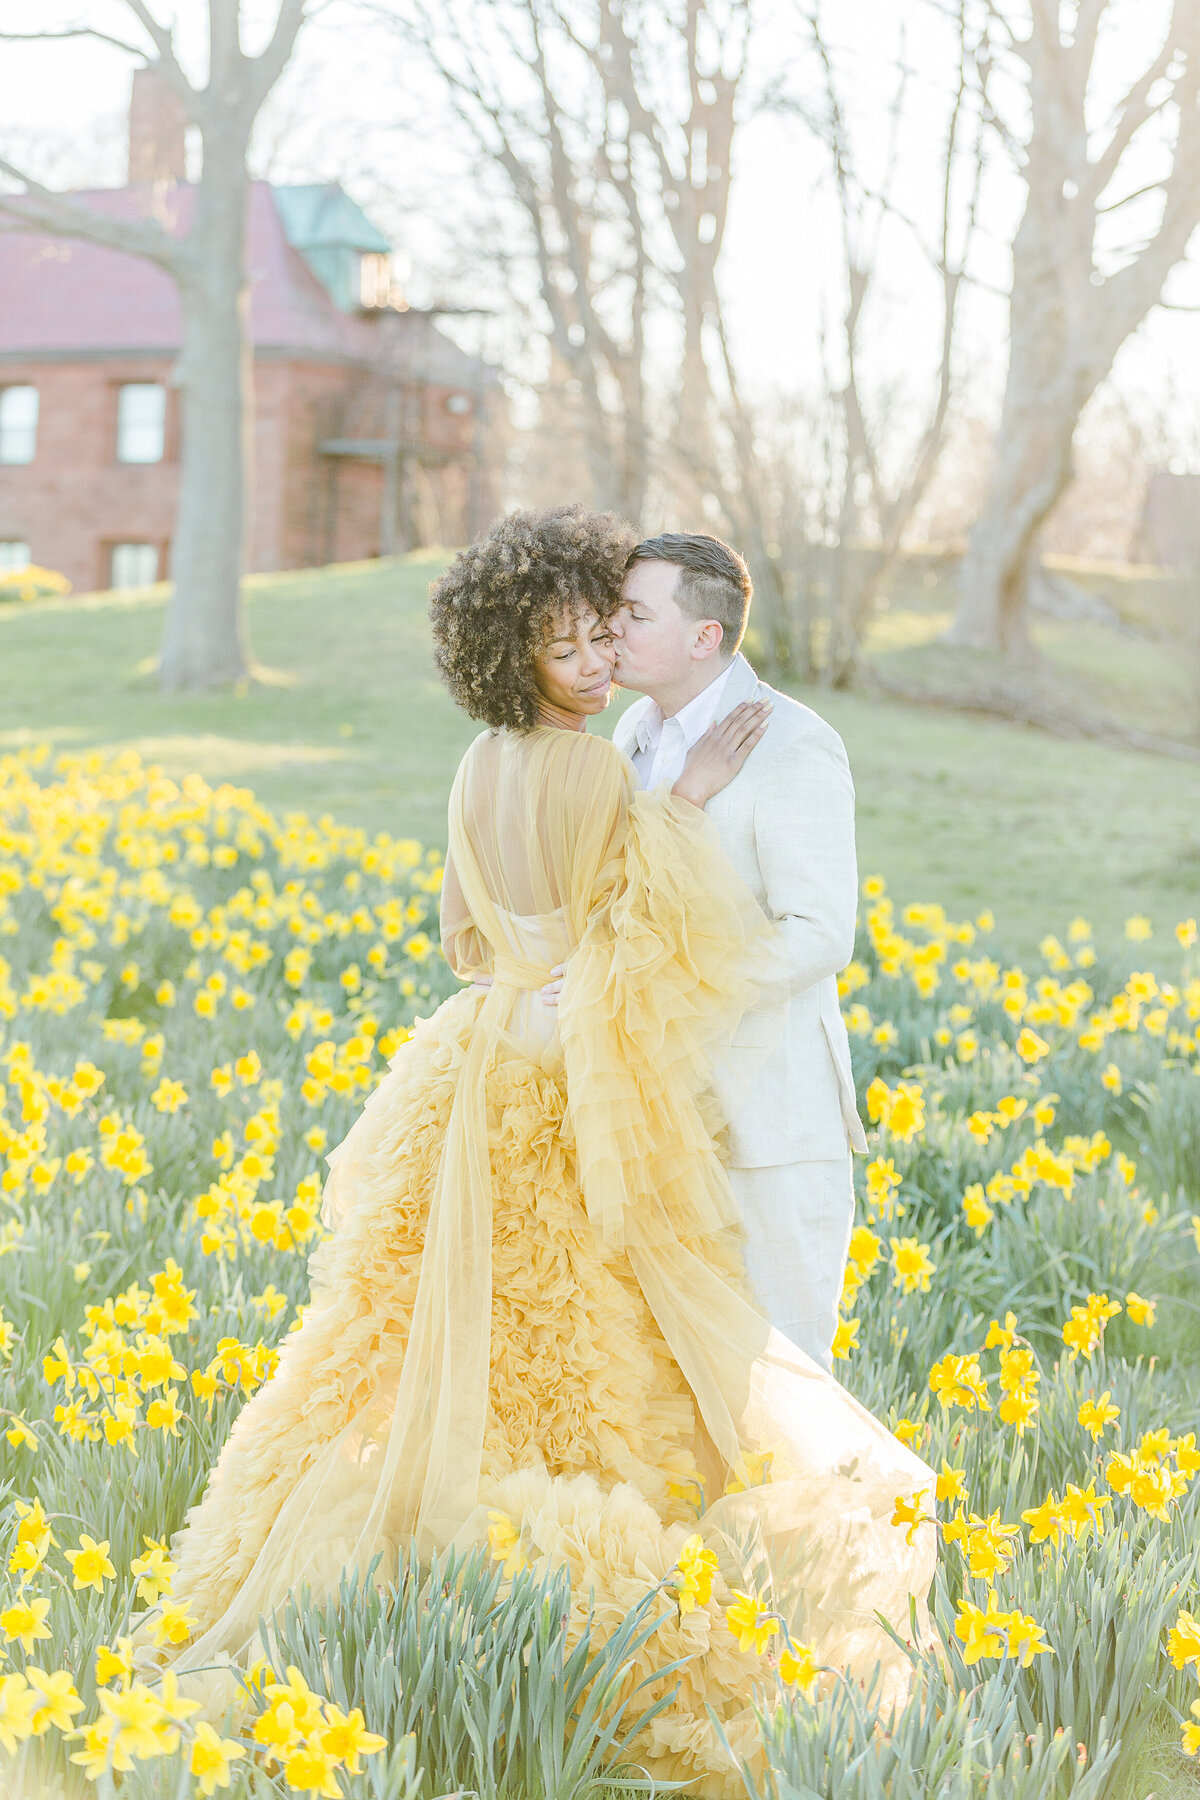 Salve Regina Cliff Walk engagement photoshoot. Man and woman are standing facing each other amongst daffodils. The woman is in a long yellow organza gown with her hands on her fiance's chest. The man is gently kissing the woman on the cheek. Captured by best RI wedding and engagement photographer Lia Rose Weddings